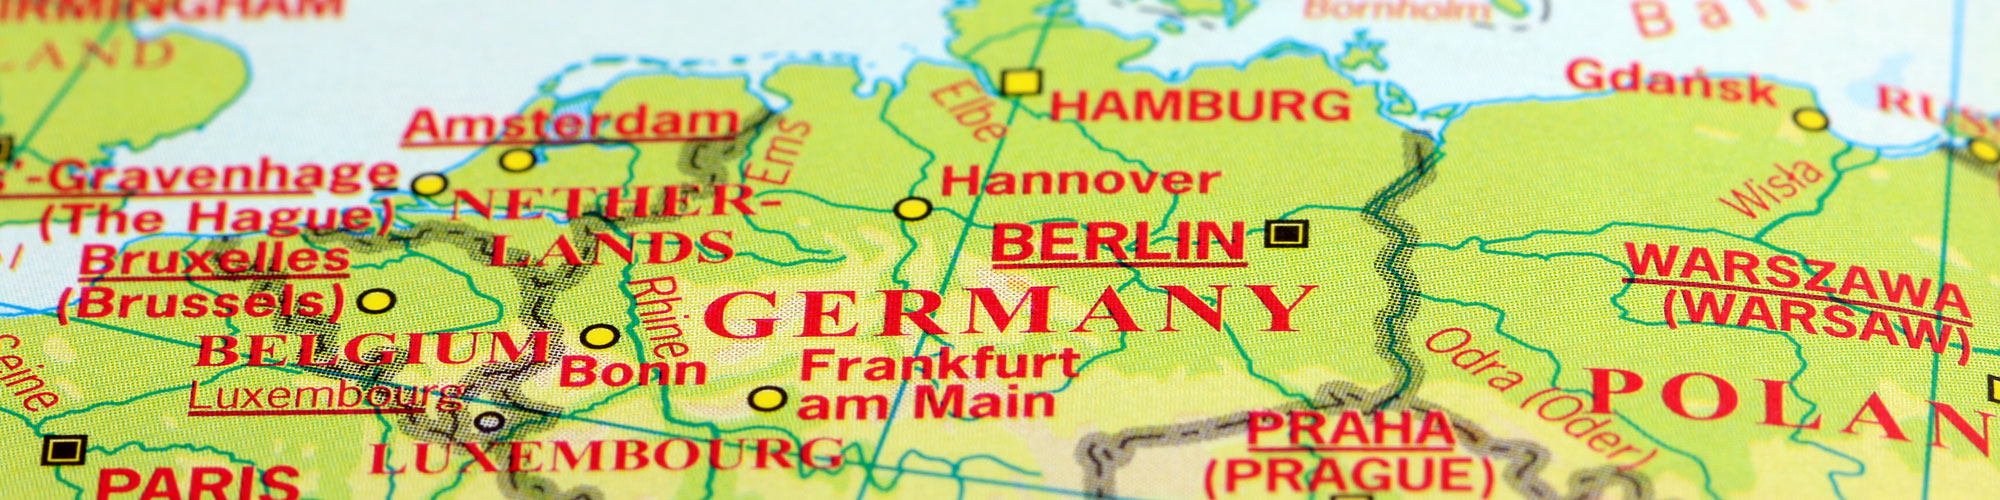 visa for Germany - language courses and working holiday